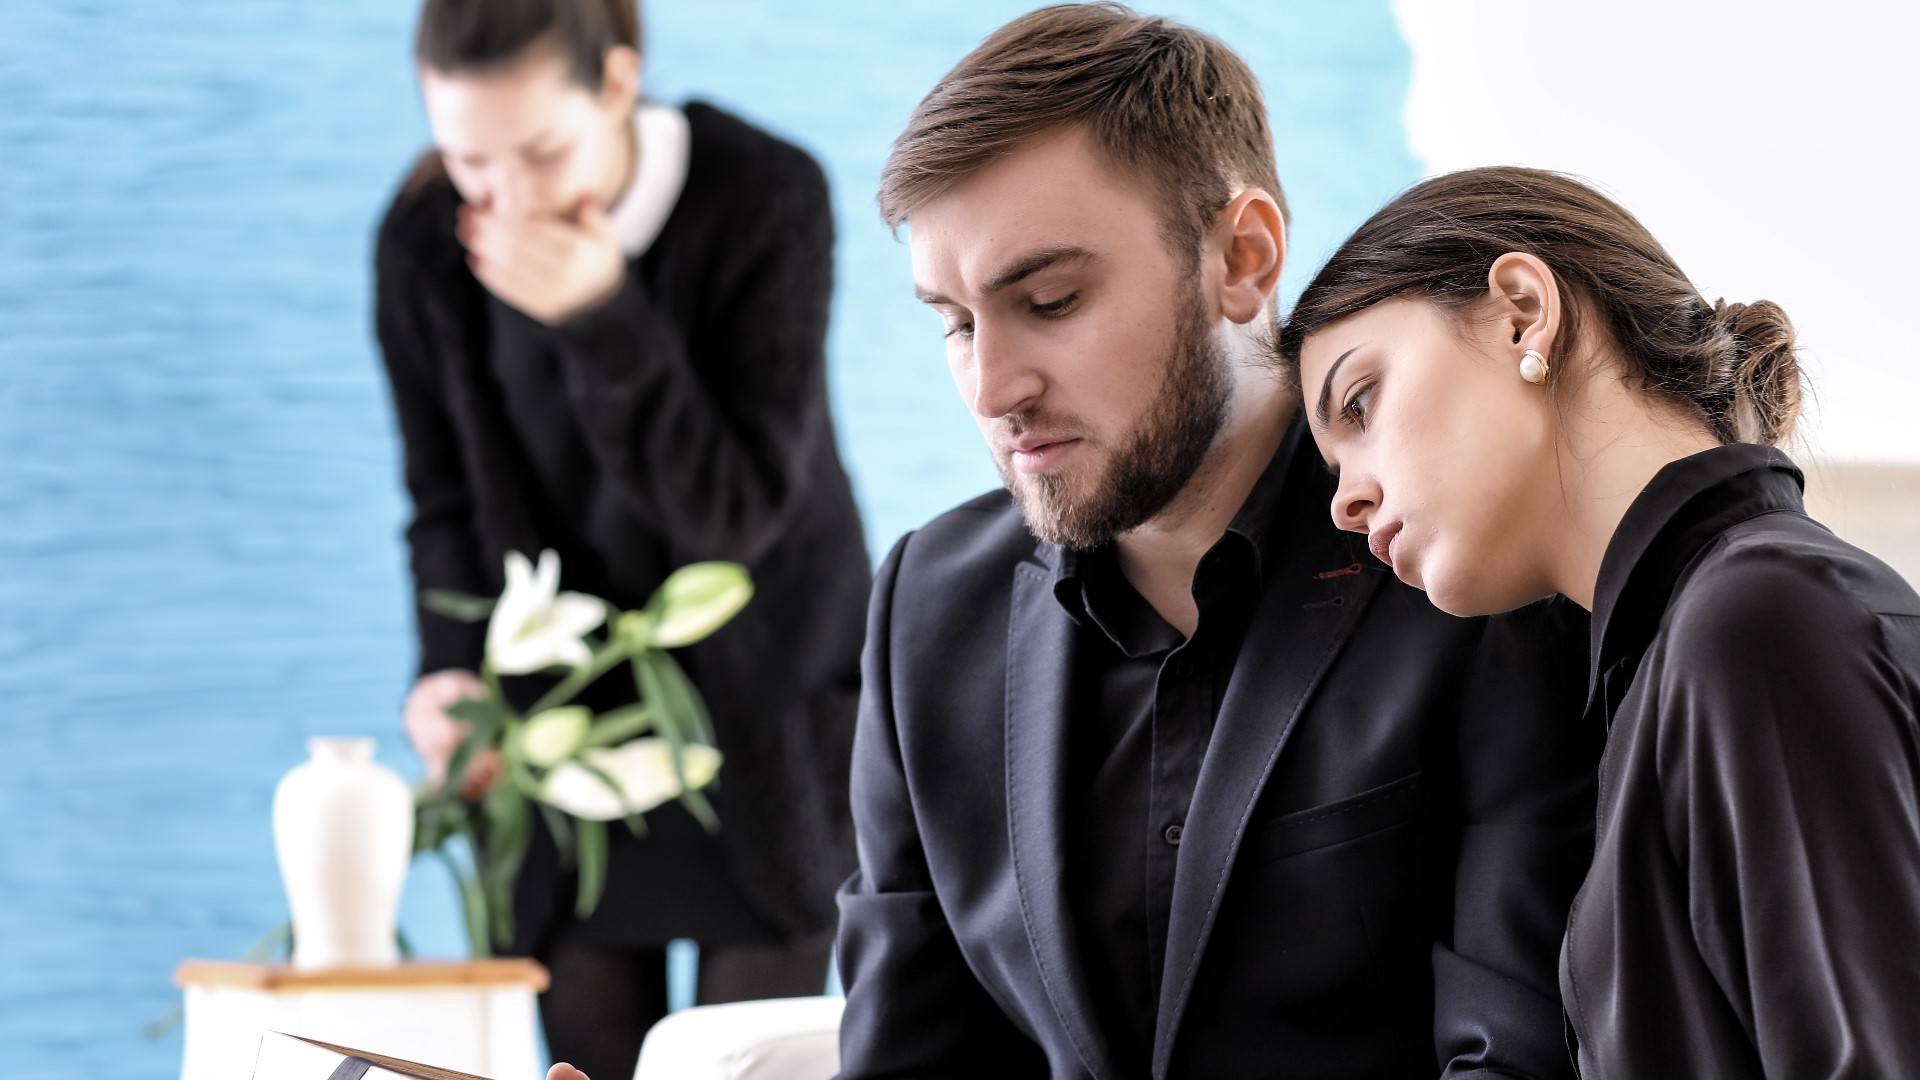 Sponsored by: SCI. Having a plan in place for your funeral can help your loved ones in their time of grief. Demaine Funeral Home specializes in that planning process